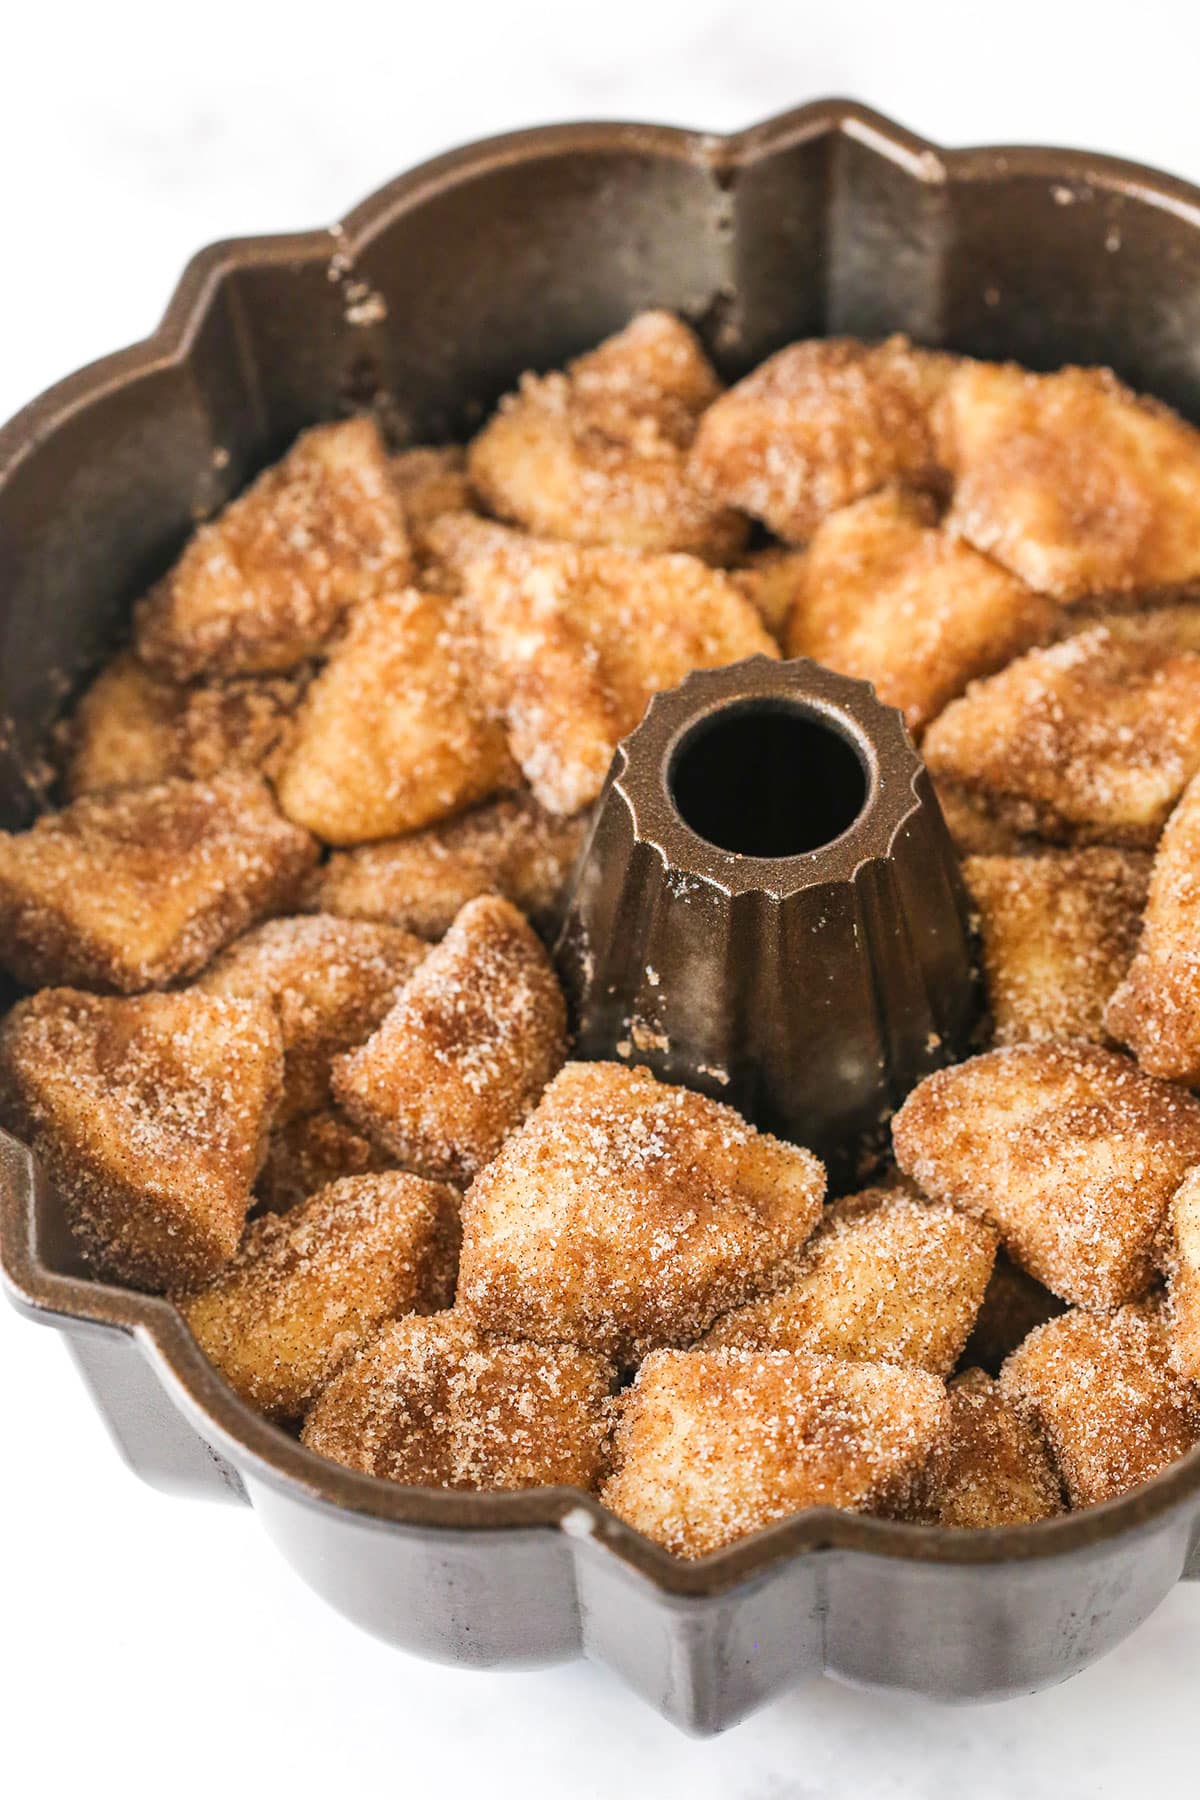 Making Monkey Bread Step showing all the biscuit pieces coated in cinnamon sugar being layered into the pan